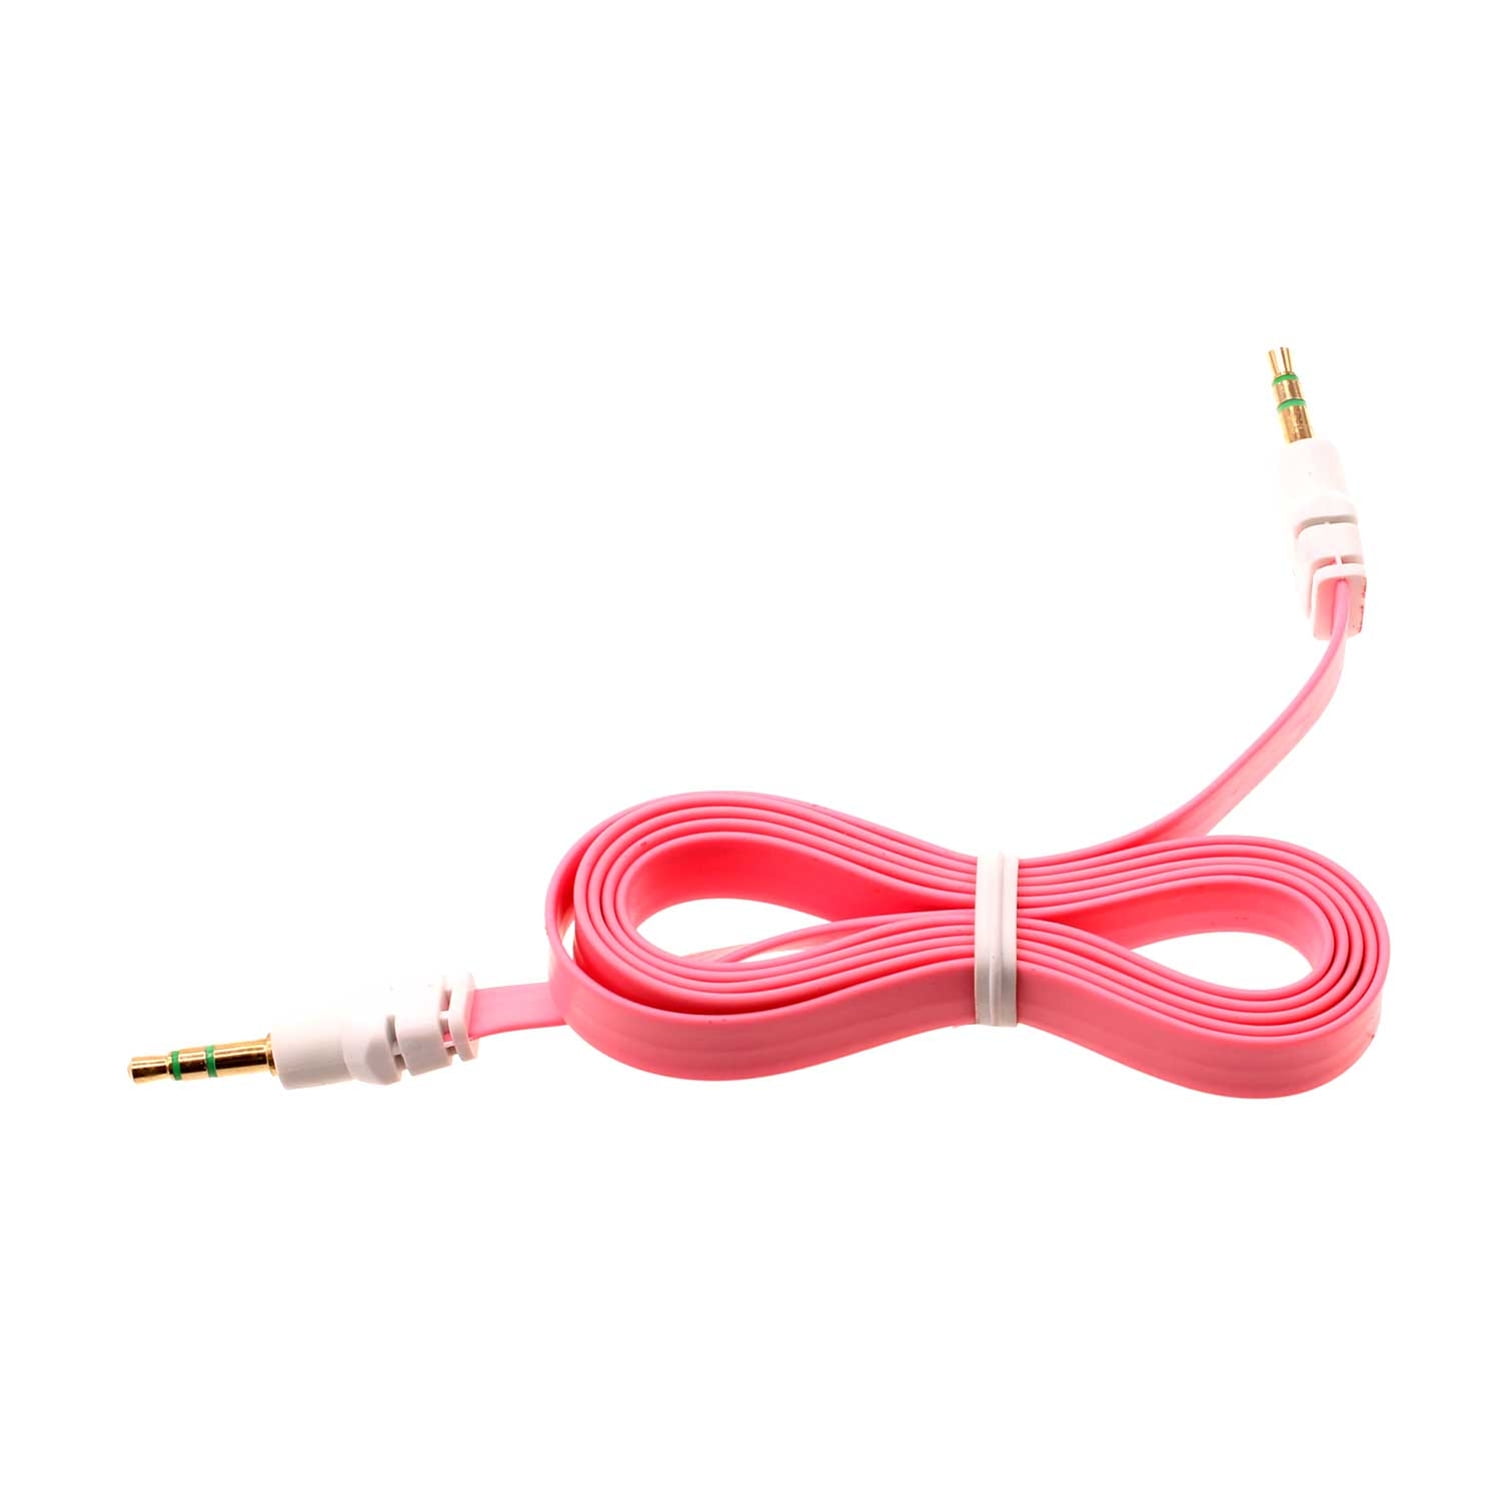 3.5mm Aux Cable Adapter Car Stereo Aux-in Audio Cord Speaker Jack Wire Pink  N7M for Boost Mobile Celero5G - Casio G-zOne Commando 4G LTE - CAT S40 S61  S41 S42 S22 Flip -